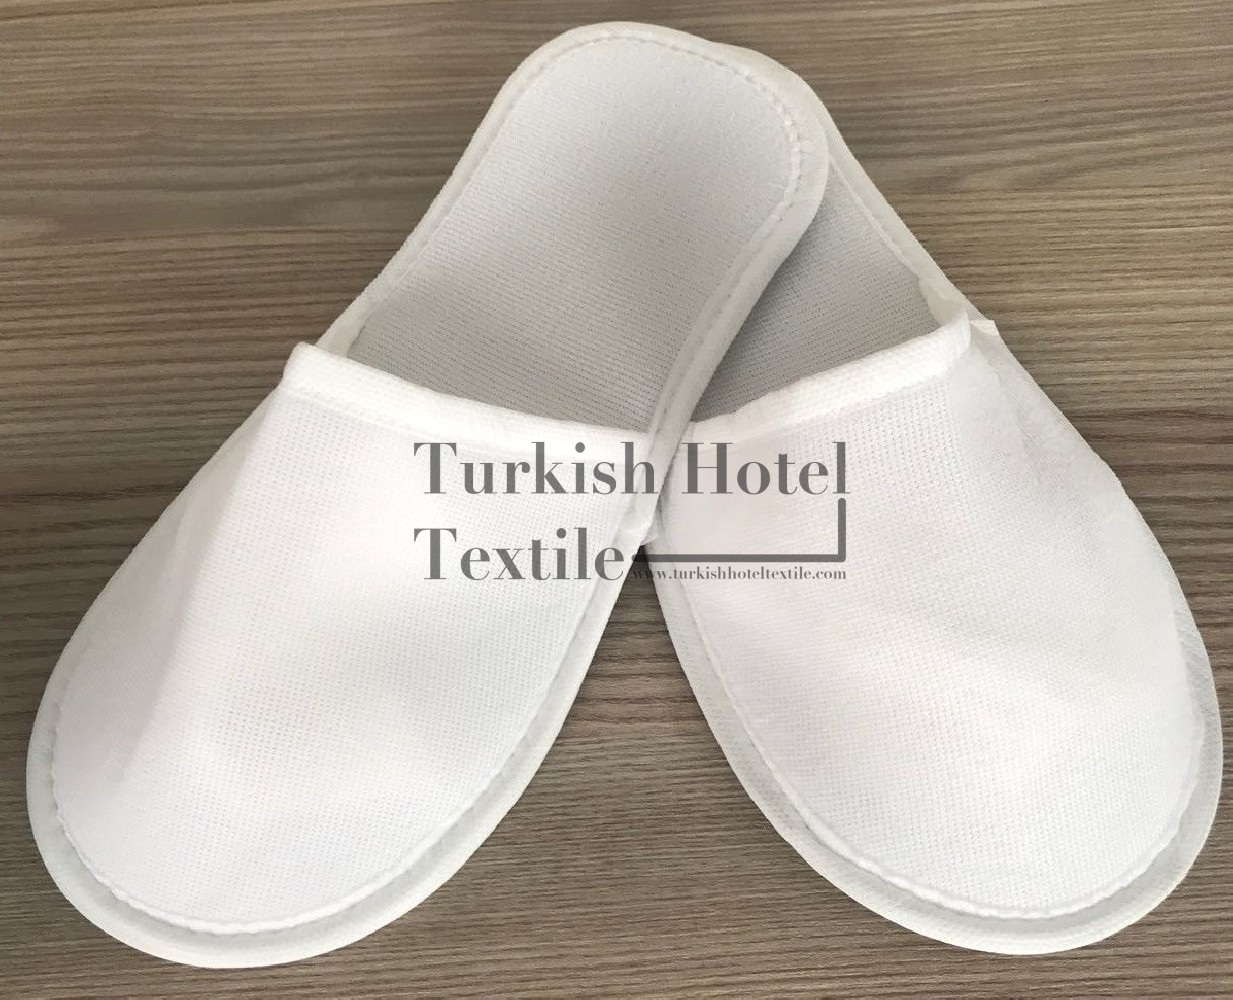 Slippers for Hotels, Spas & Wholesale | Richard Haworth